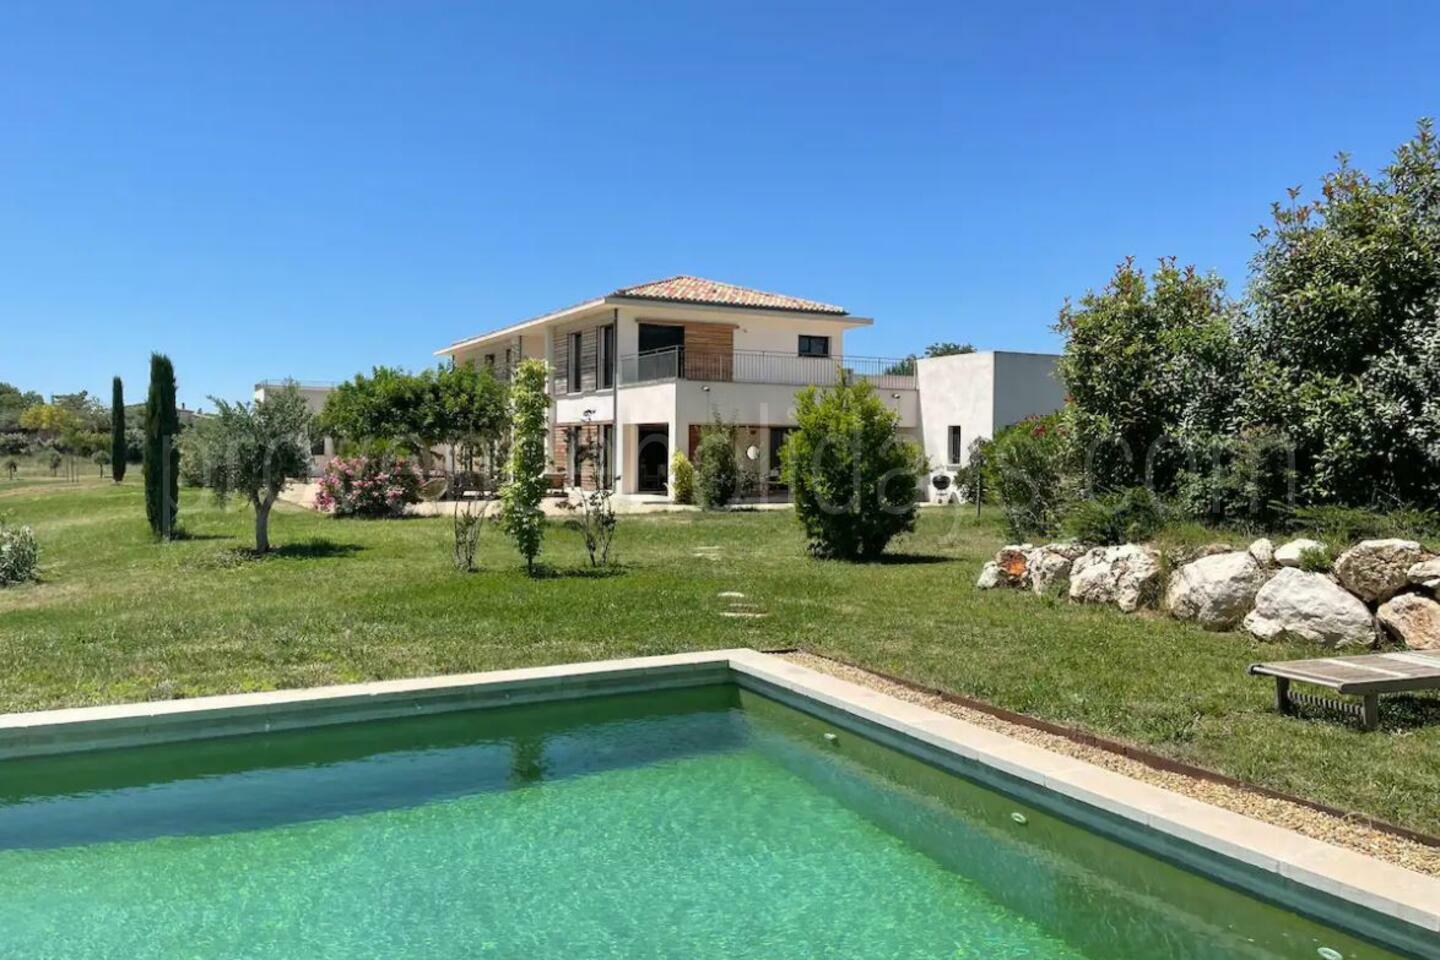 Modern Holiday Rental with Private Pool near Aix-en-Provence 1 - Mas des Cigales: Villa: Pool